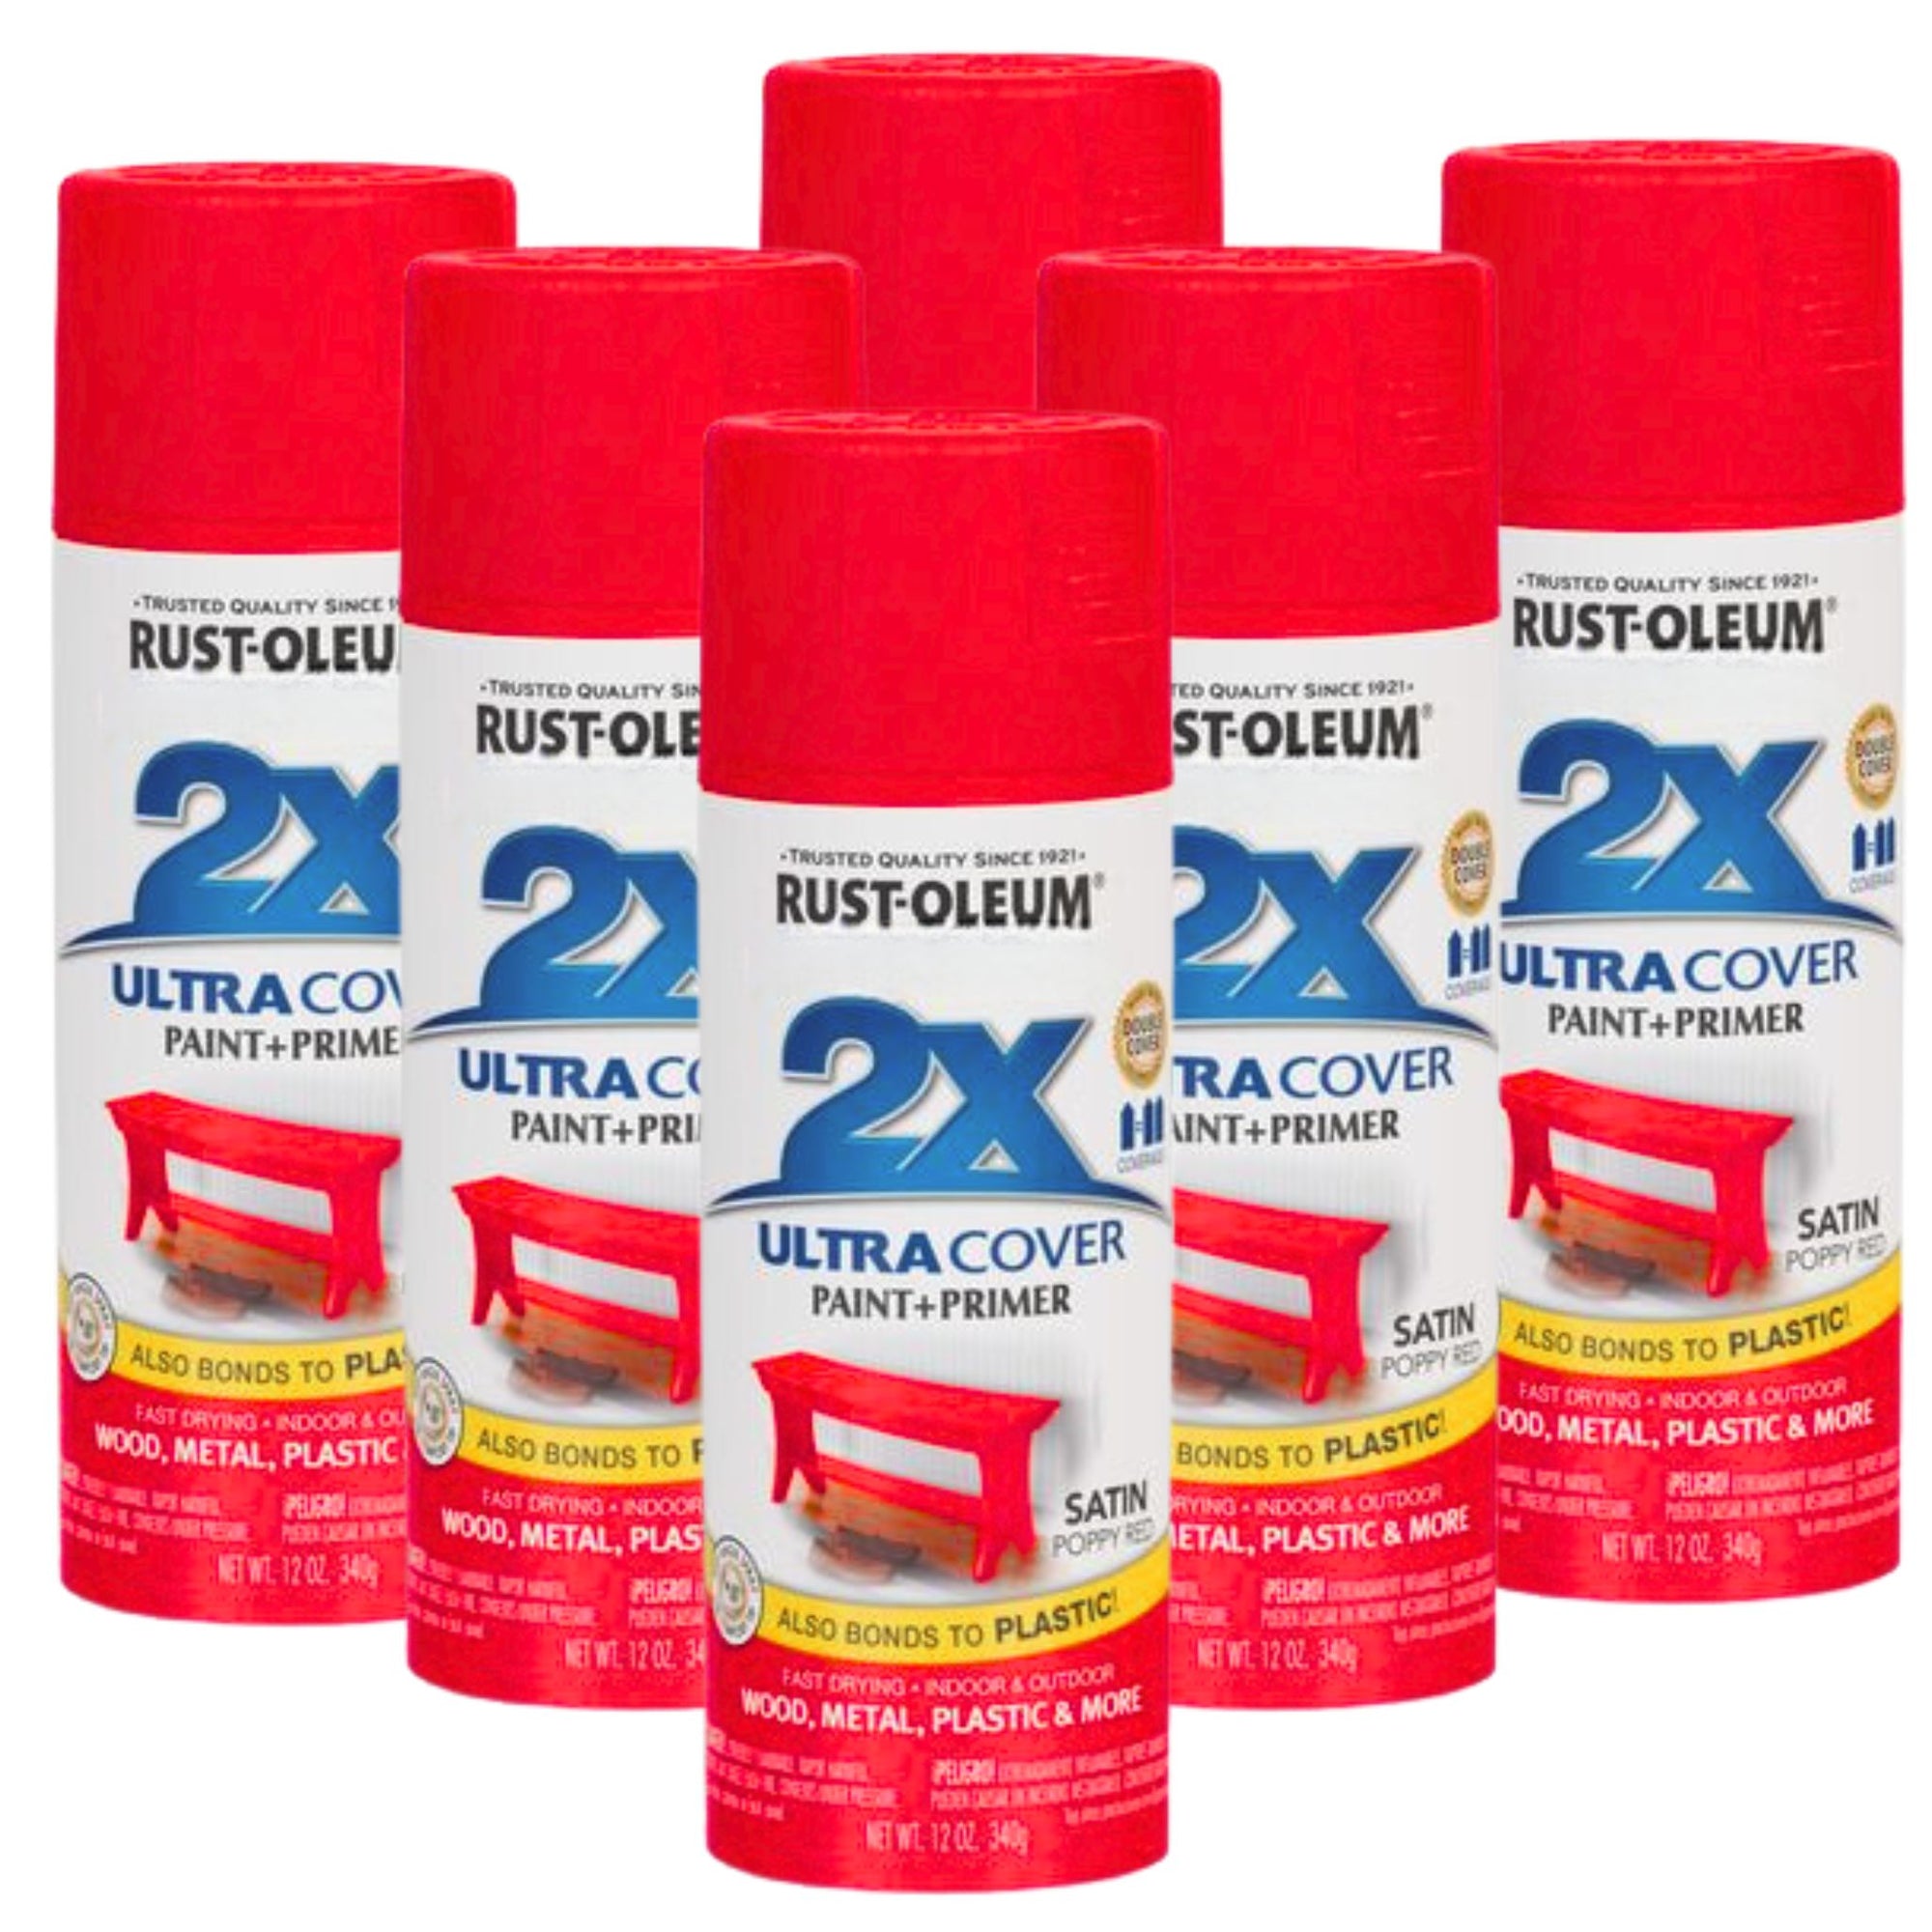 RUSTOLEUM 2X SATIN POPPY RED ULTRACOVER Paint & Primer 286844 - South East Clearance Centre